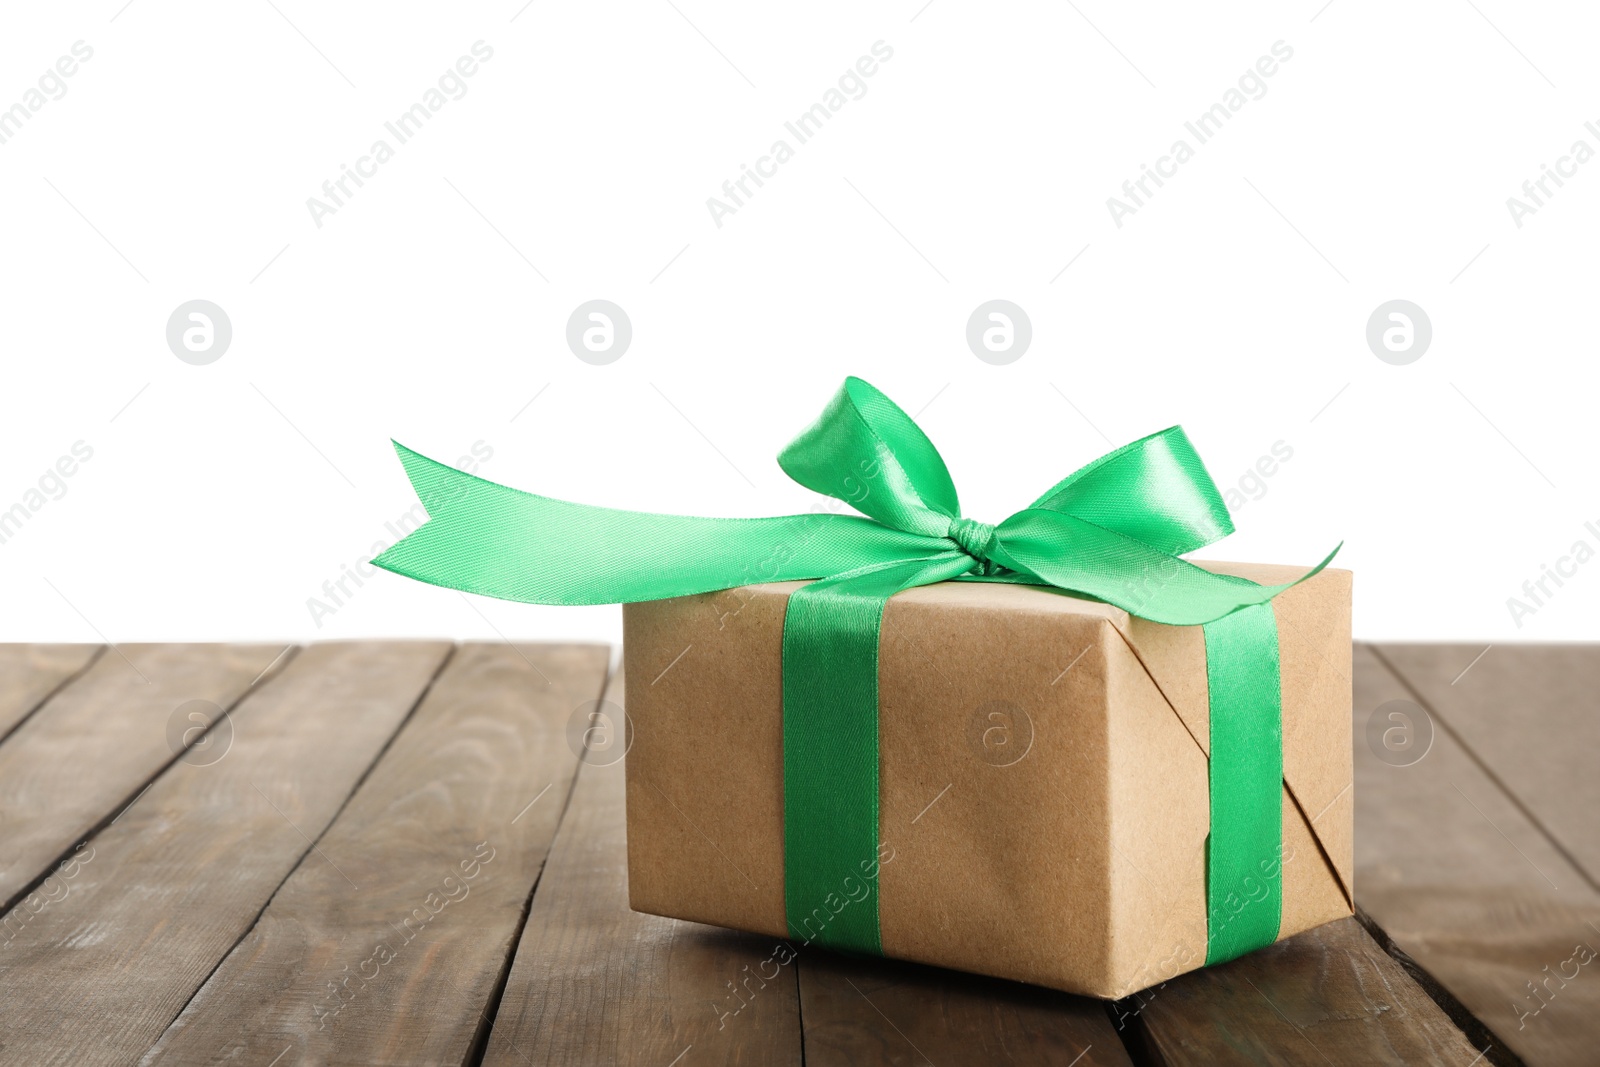 Photo of Christmas gift on wooden table against white background